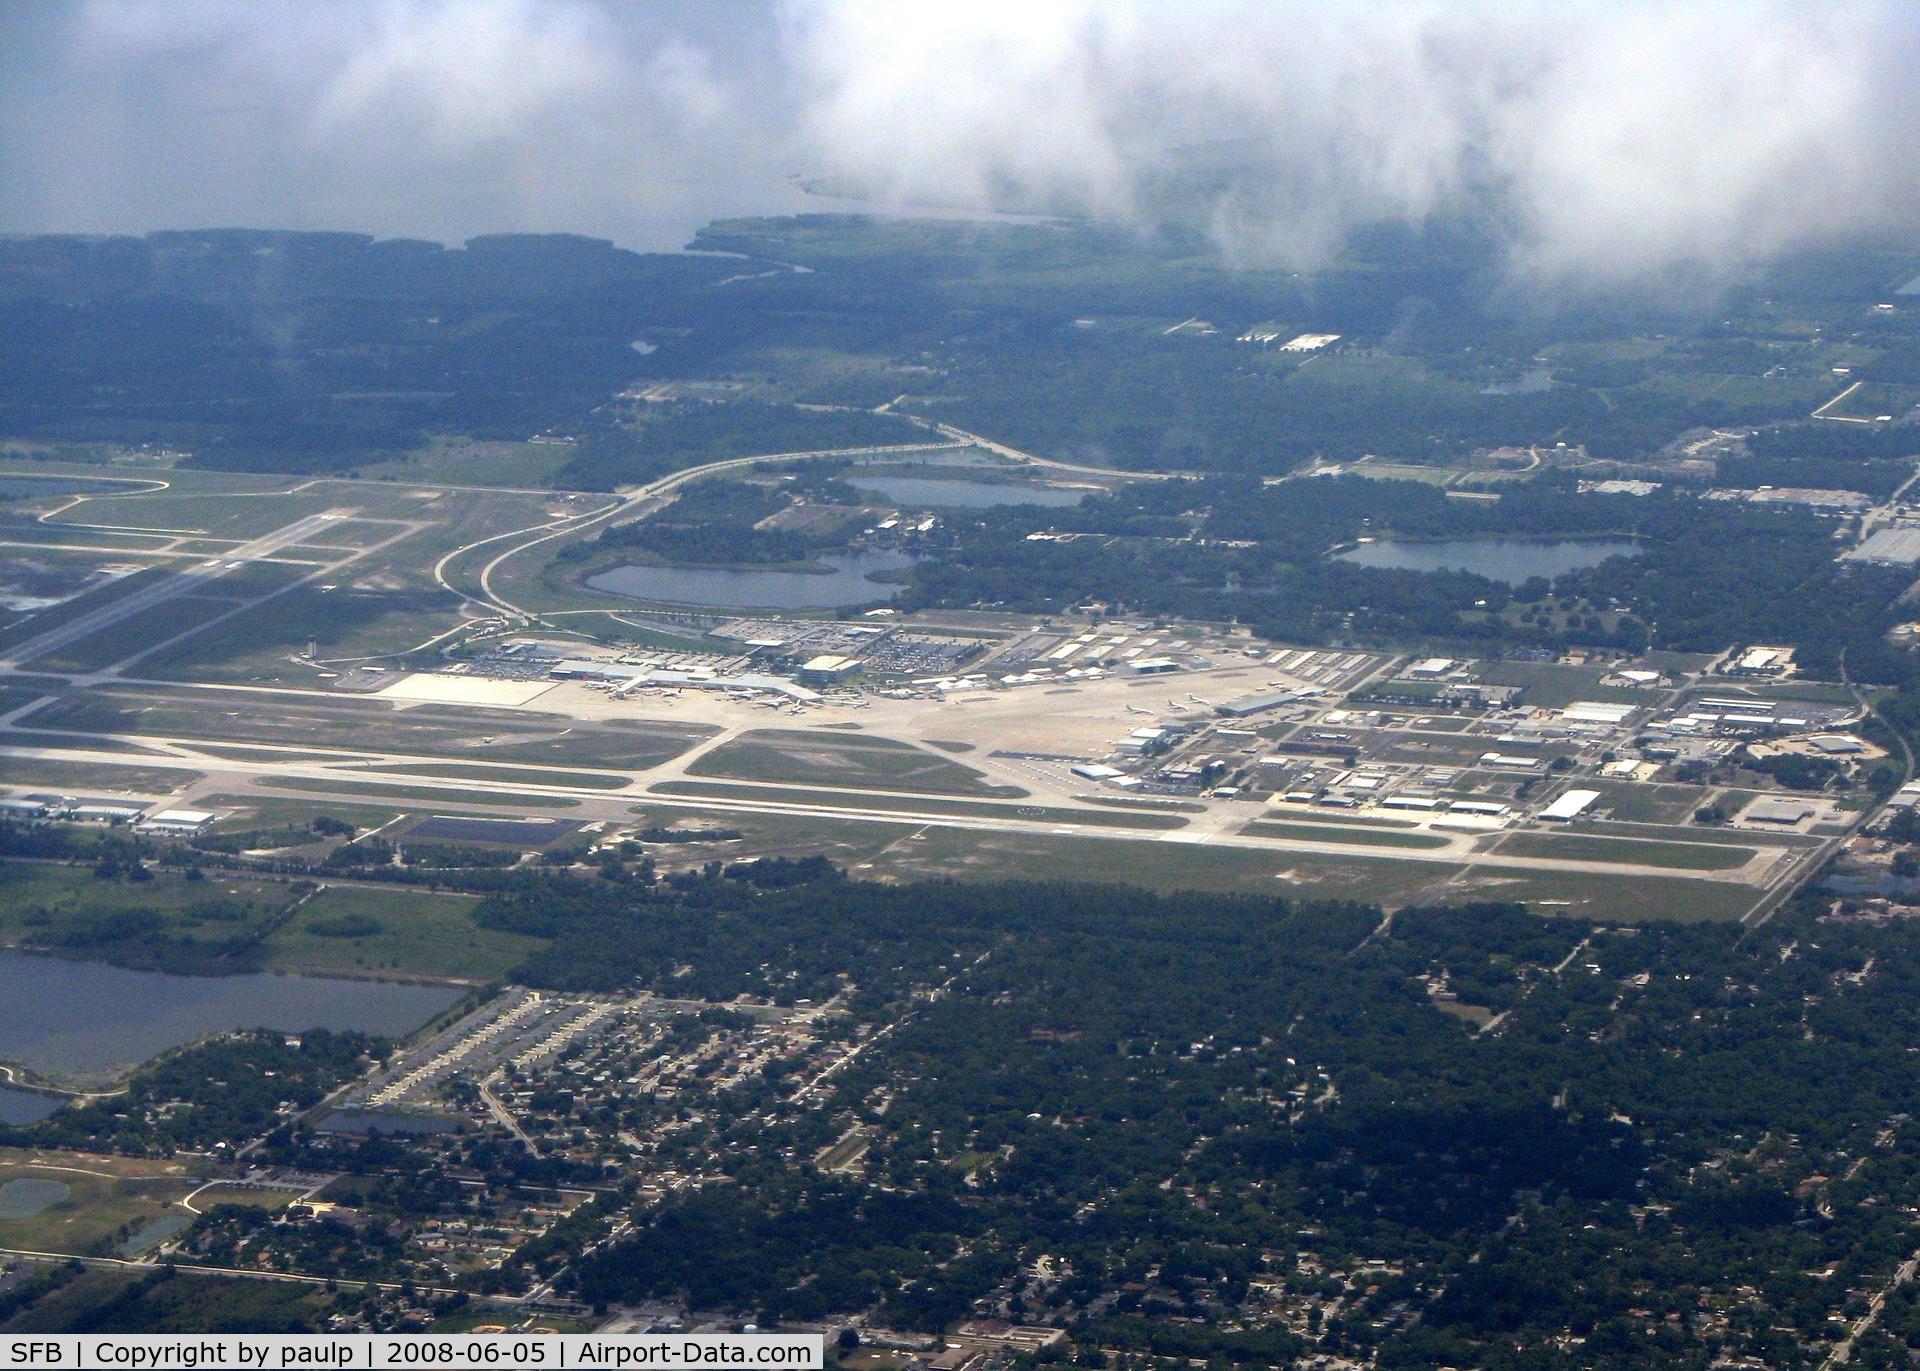 Orlando Sanford International Airport (SFB) - Passing back around the airport after departing 9L.